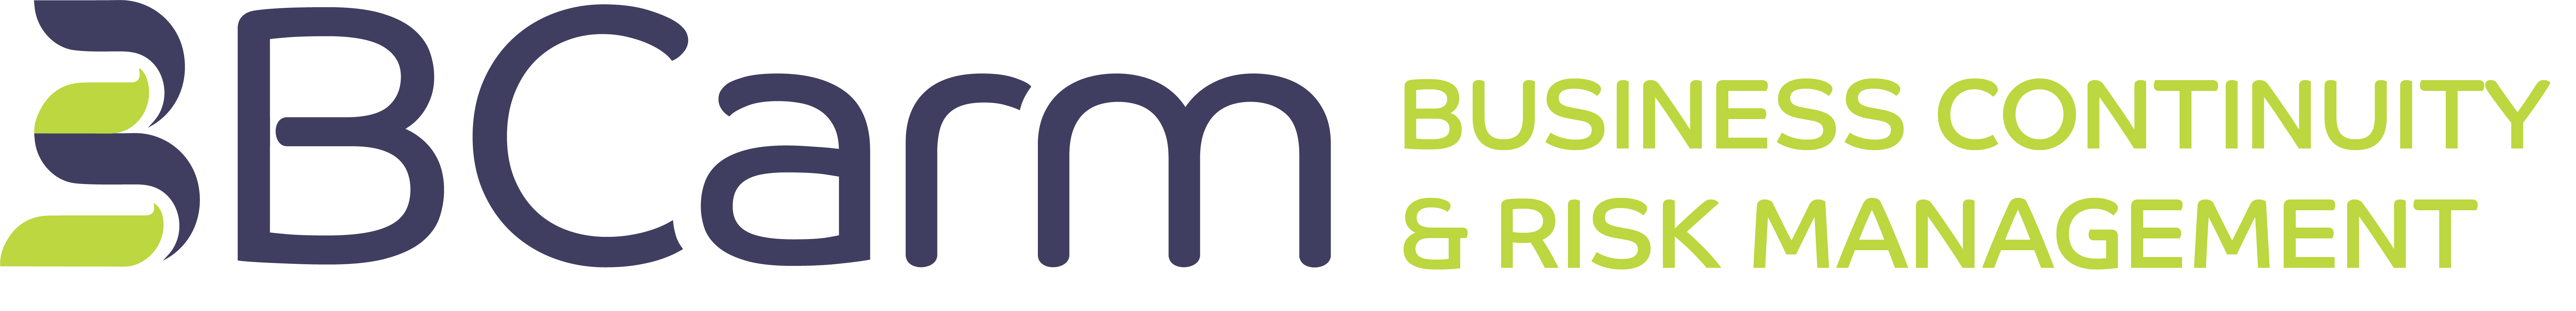 The BCarm logo. Click here to return to the site home page.